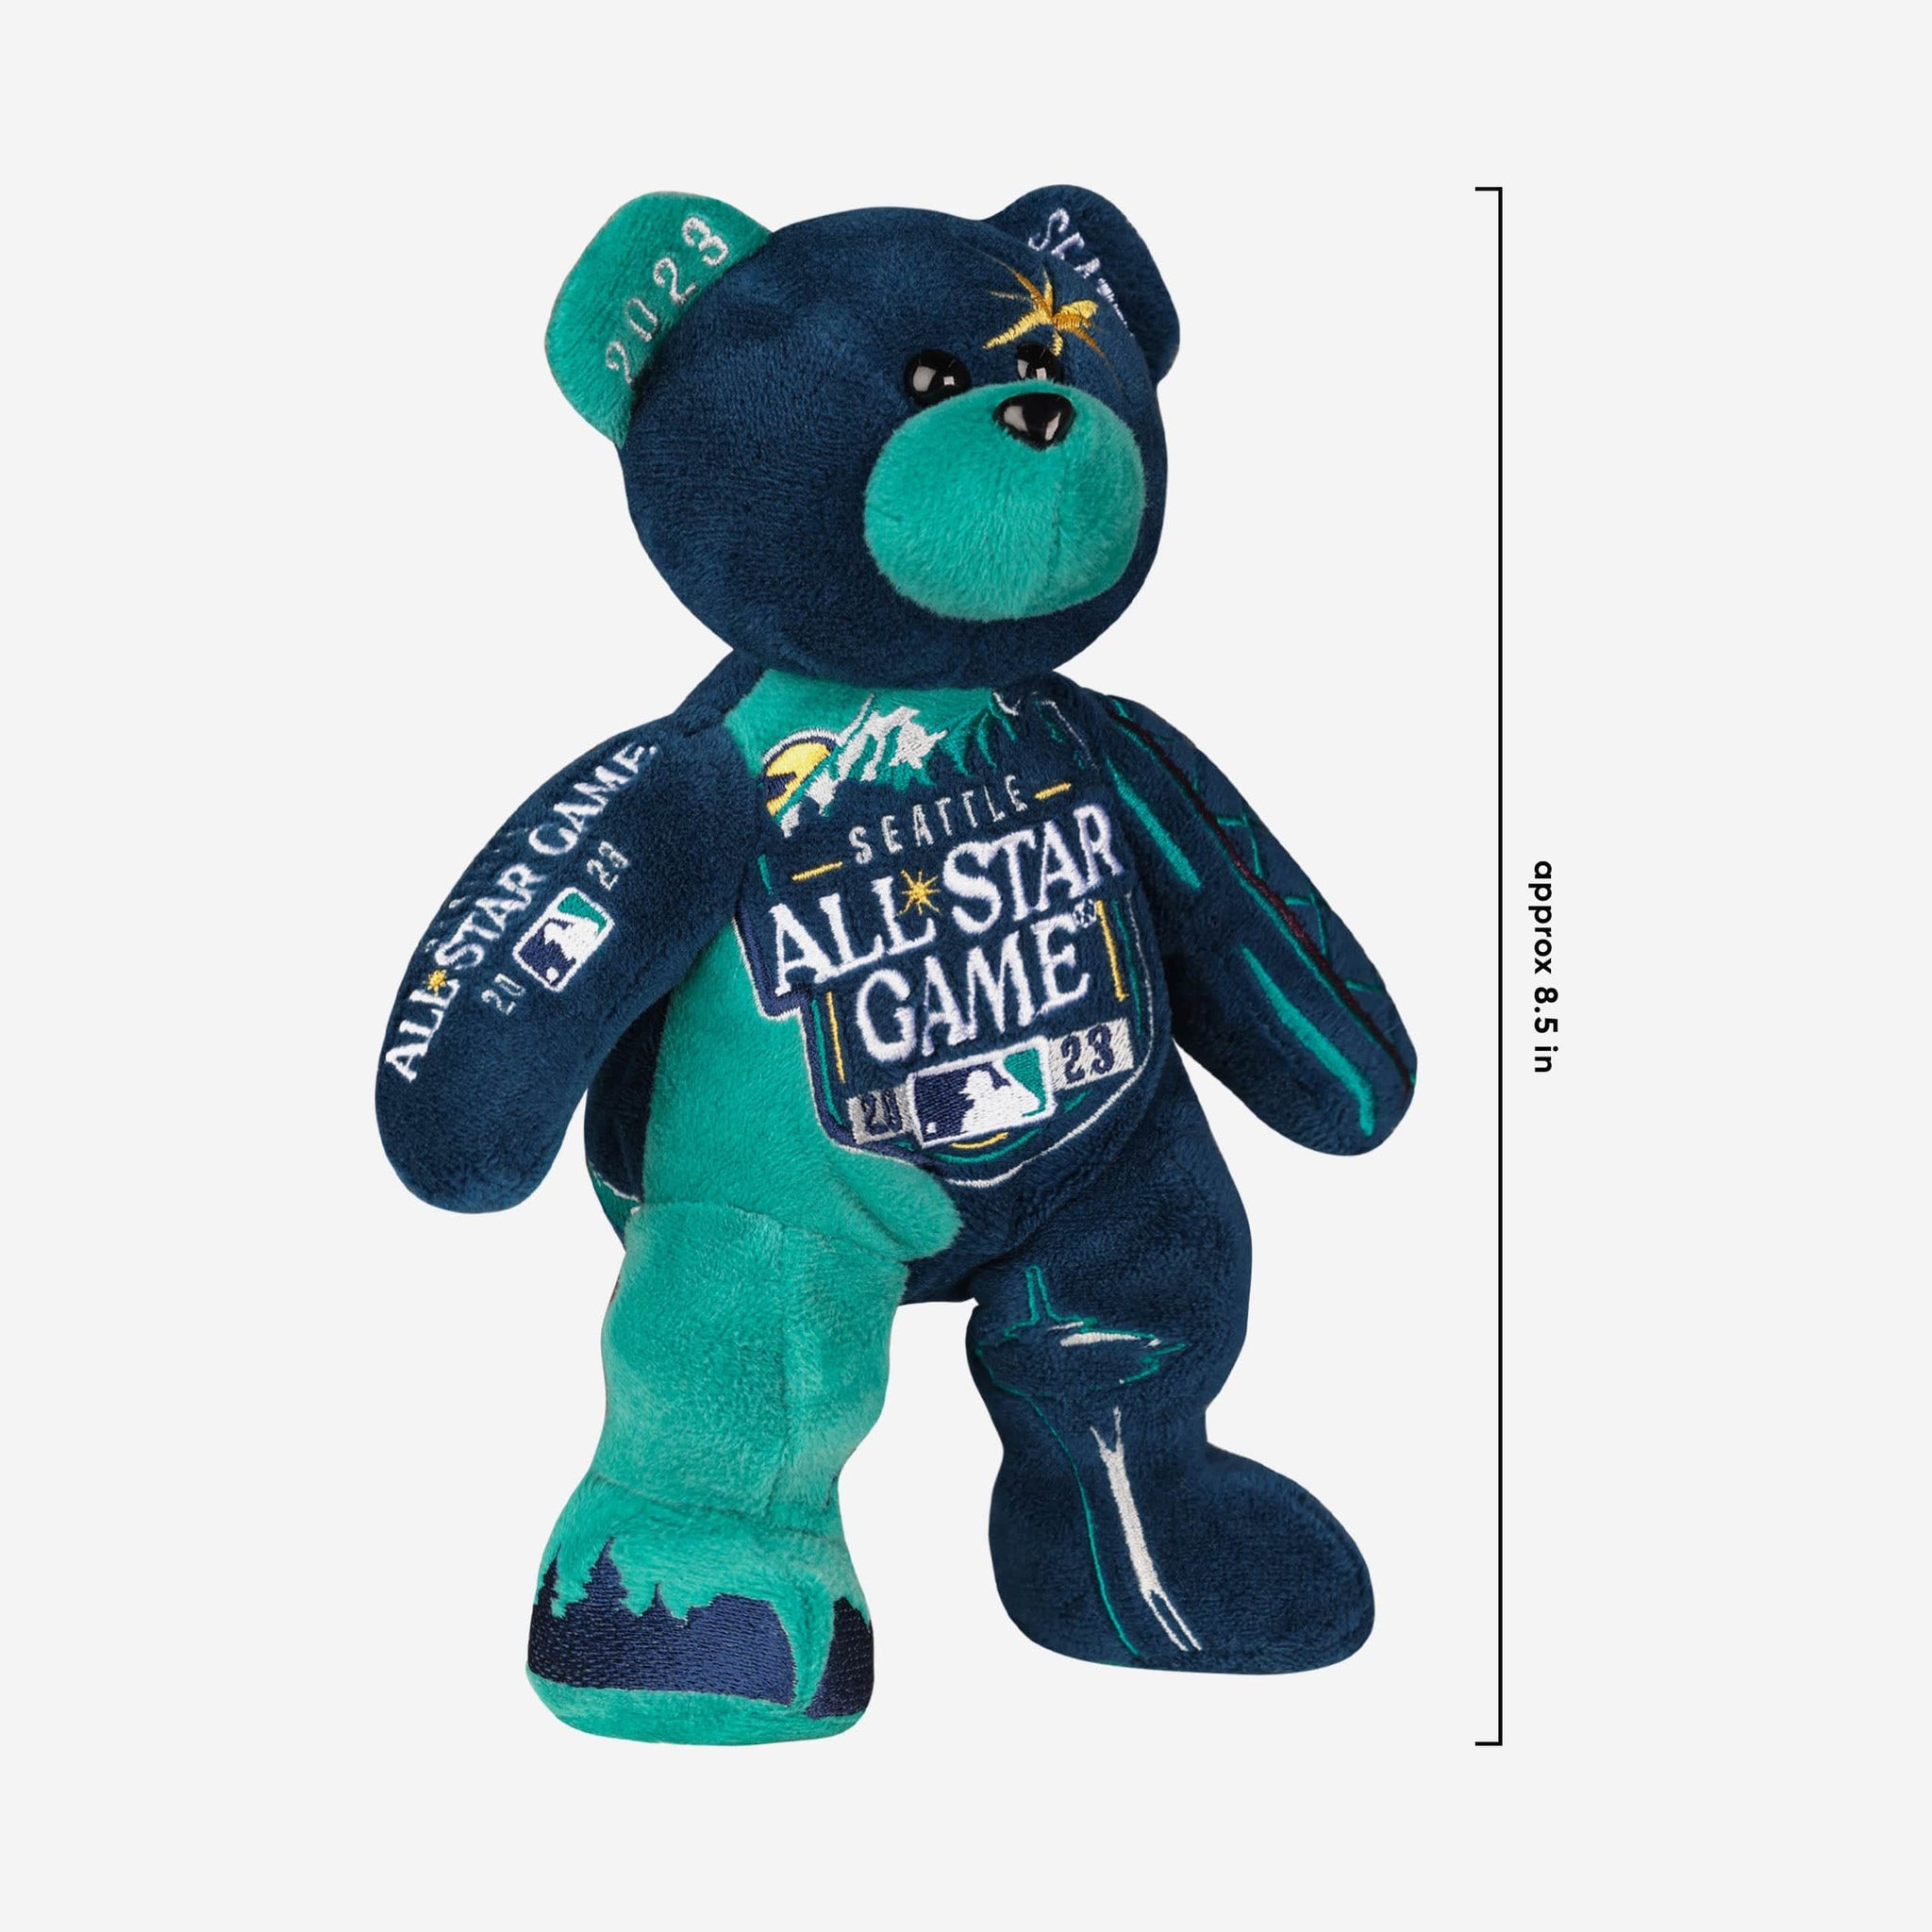 All-Star Game jerseys 2023: Teal green & navy blue in Seattle